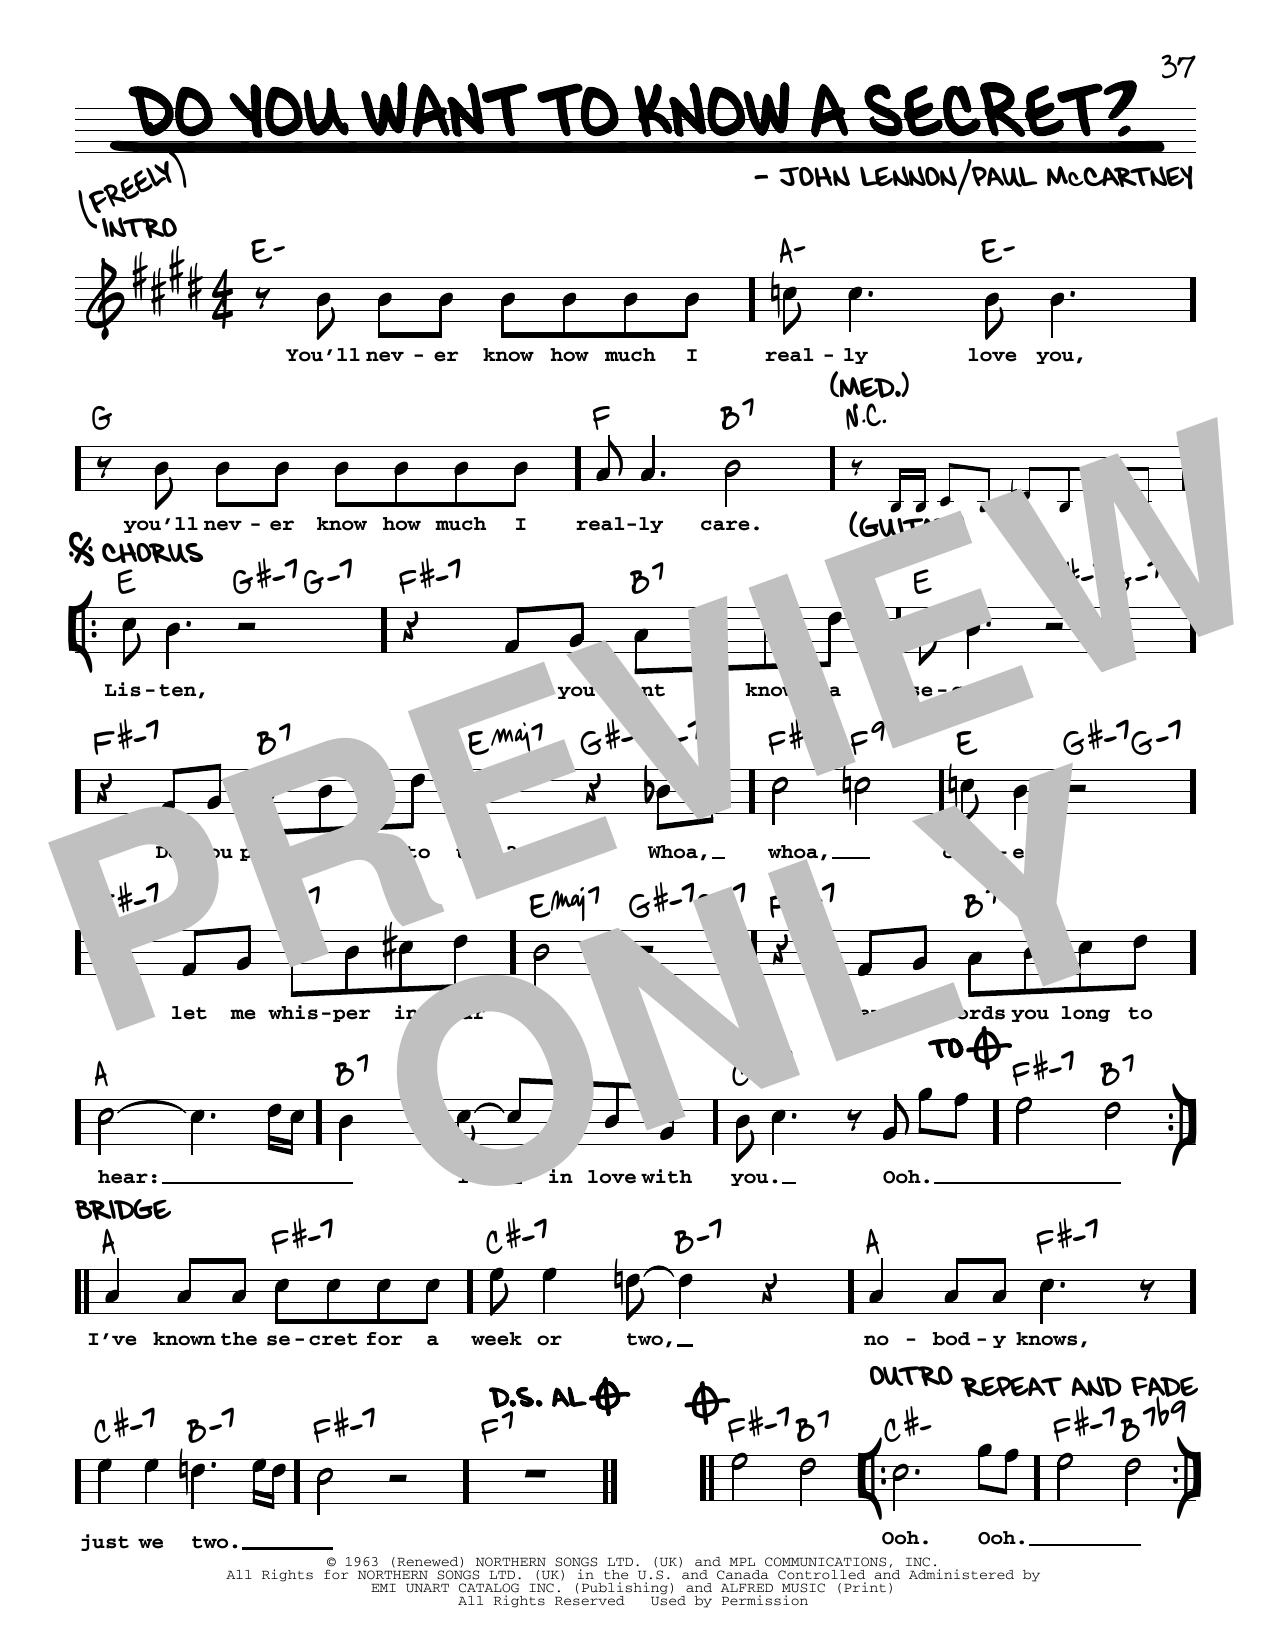 Download The Beatles Do You Want To Know A Secret? [Jazz ver Sheet Music